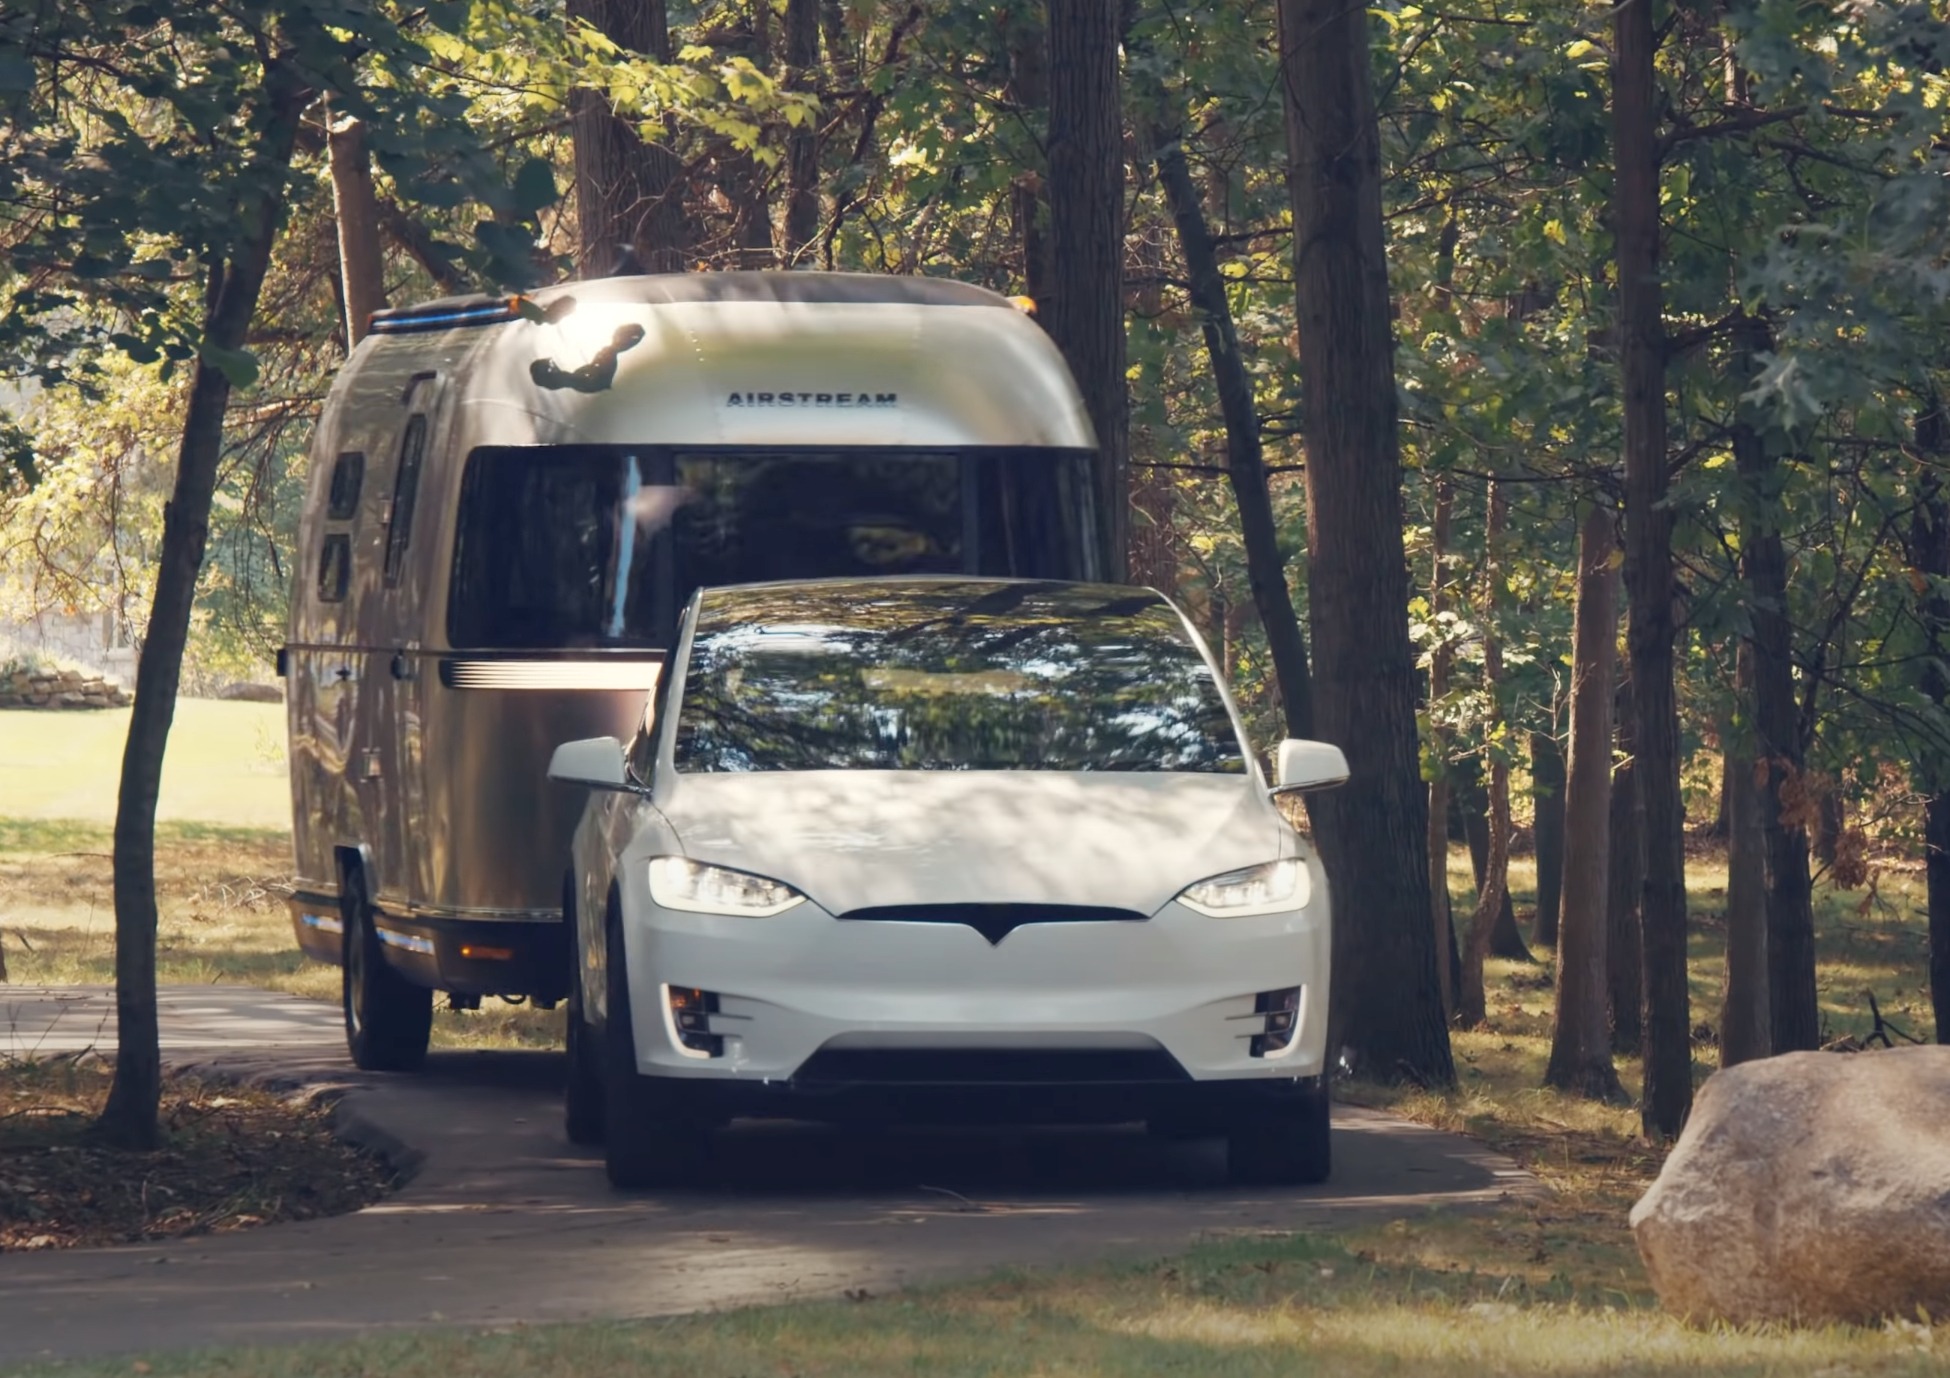 Airstream Reveals Concept of First Electric RV Trailer